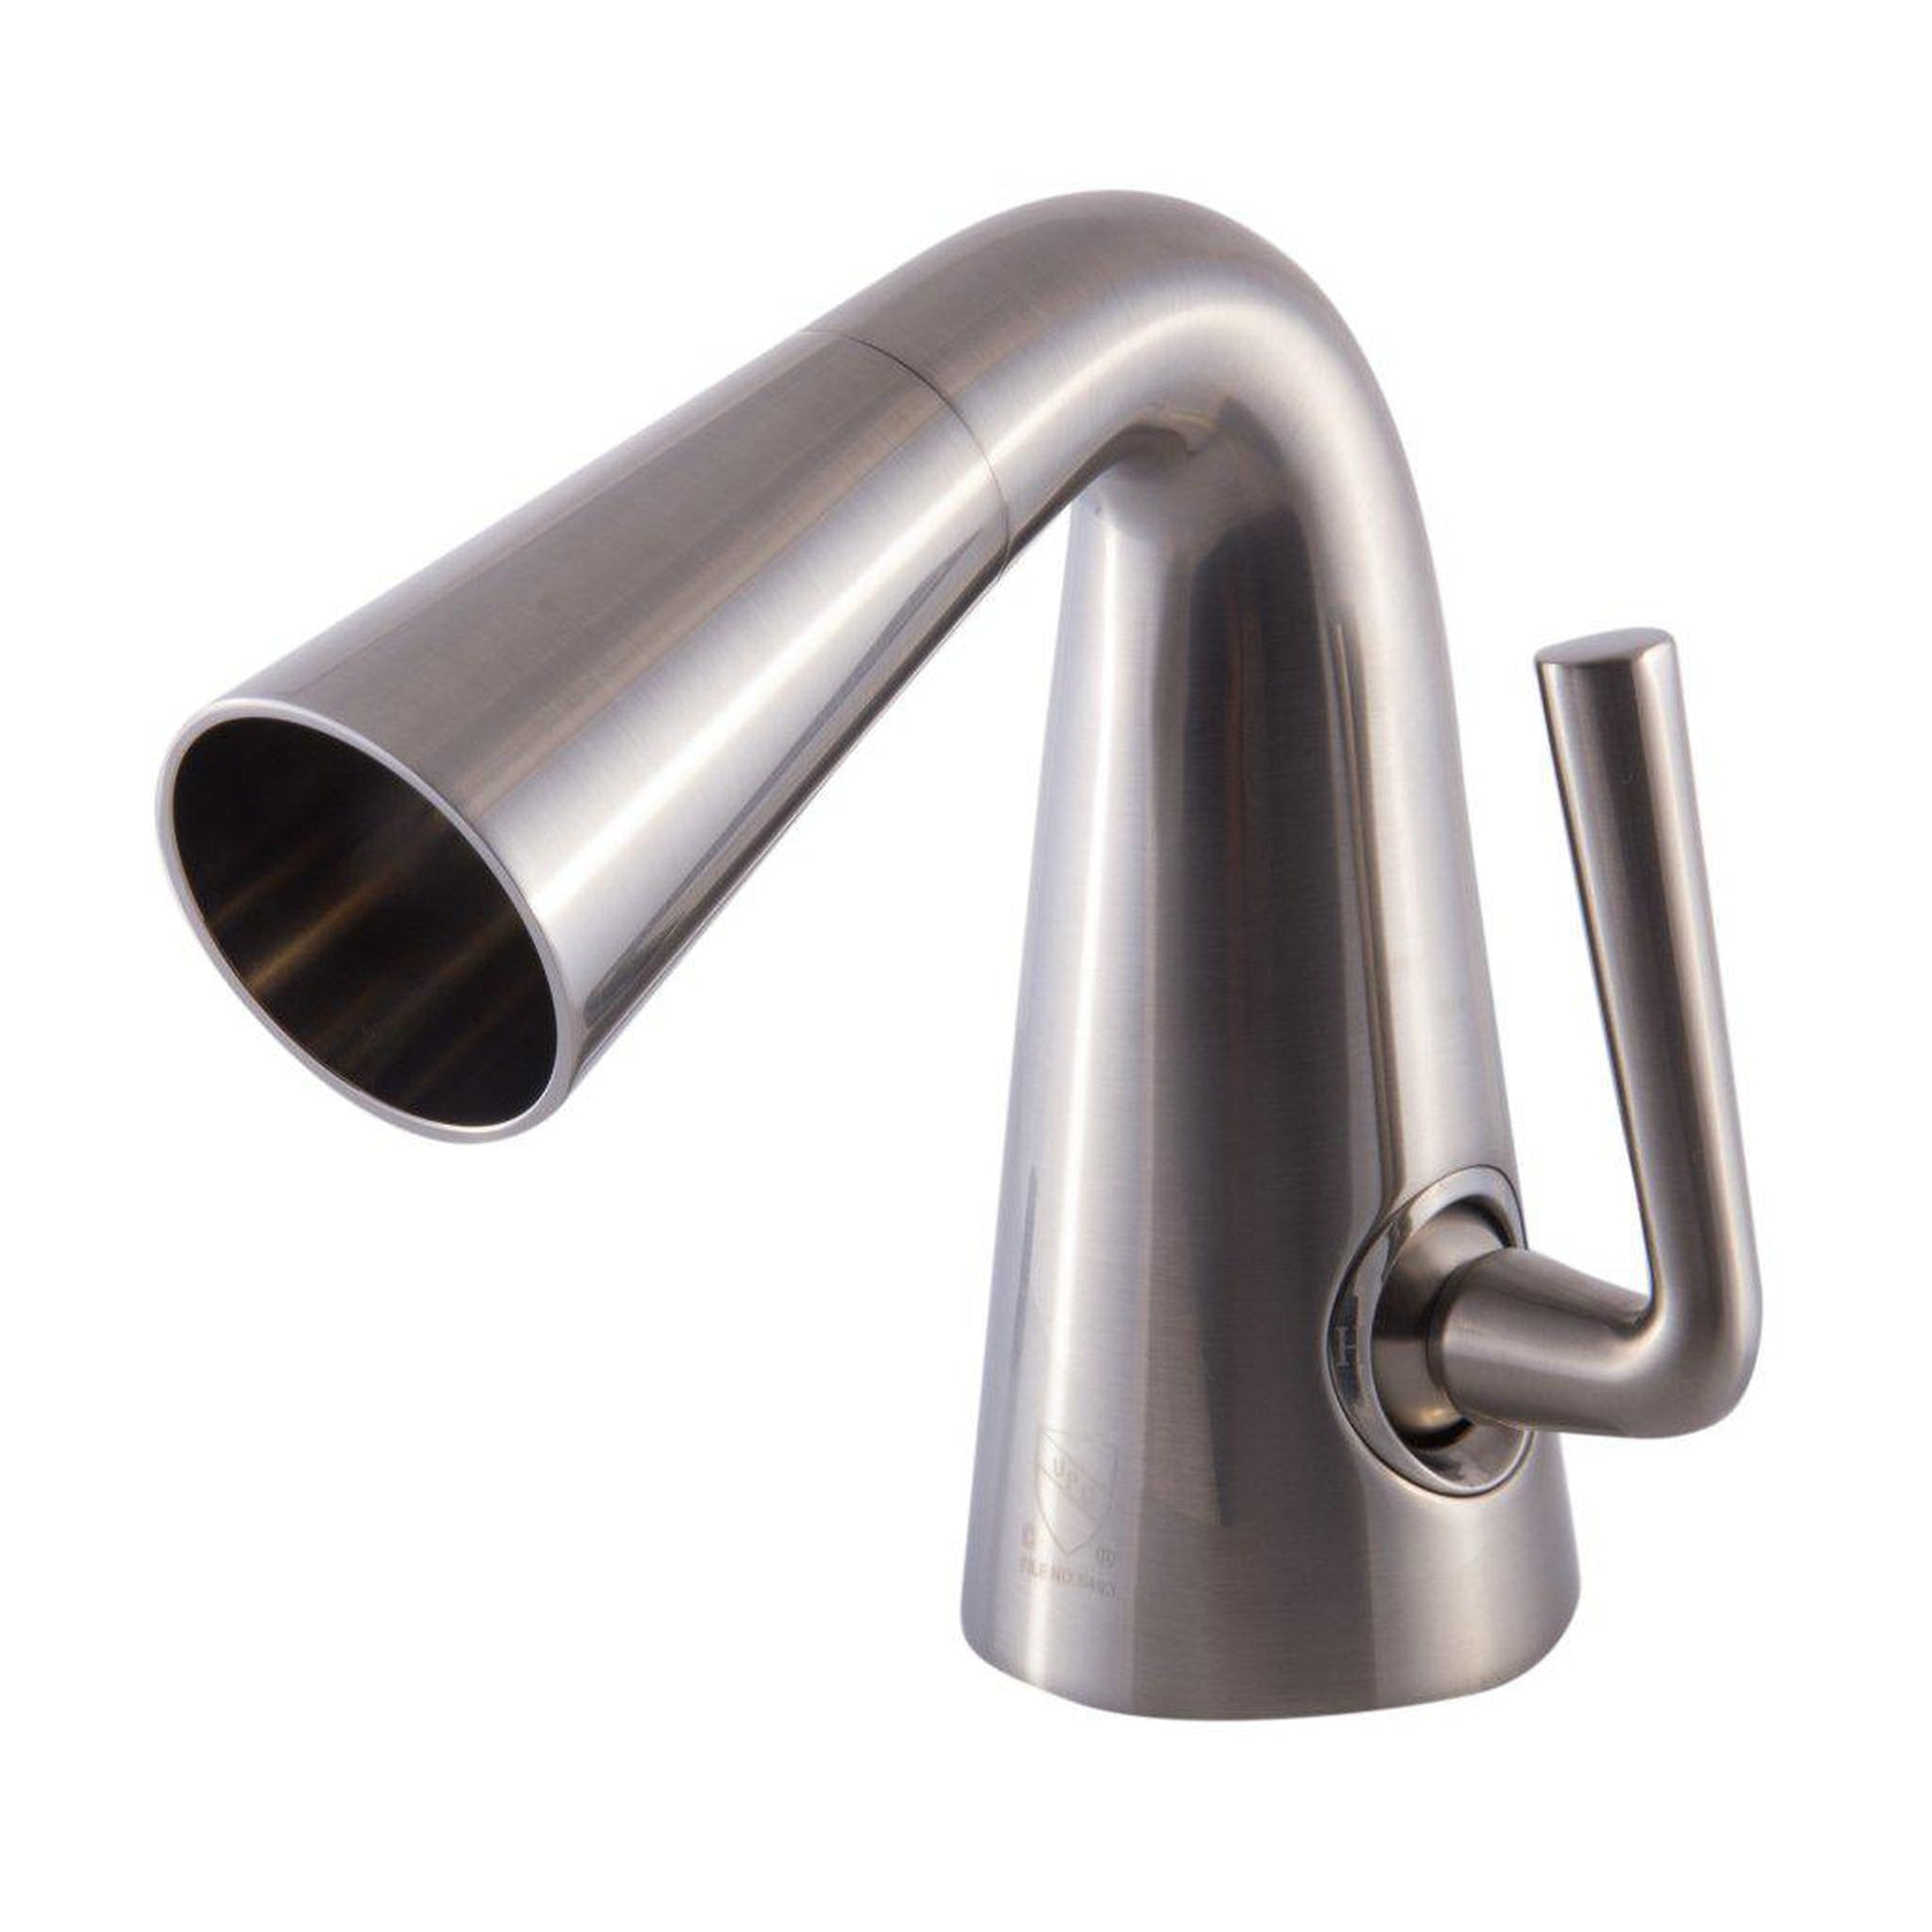 ALFI Brand AB1788-BN Brushed Nickel Single Hole Cone Waterfall Spout Brass Bathroom Sink Faucet With Single Lever